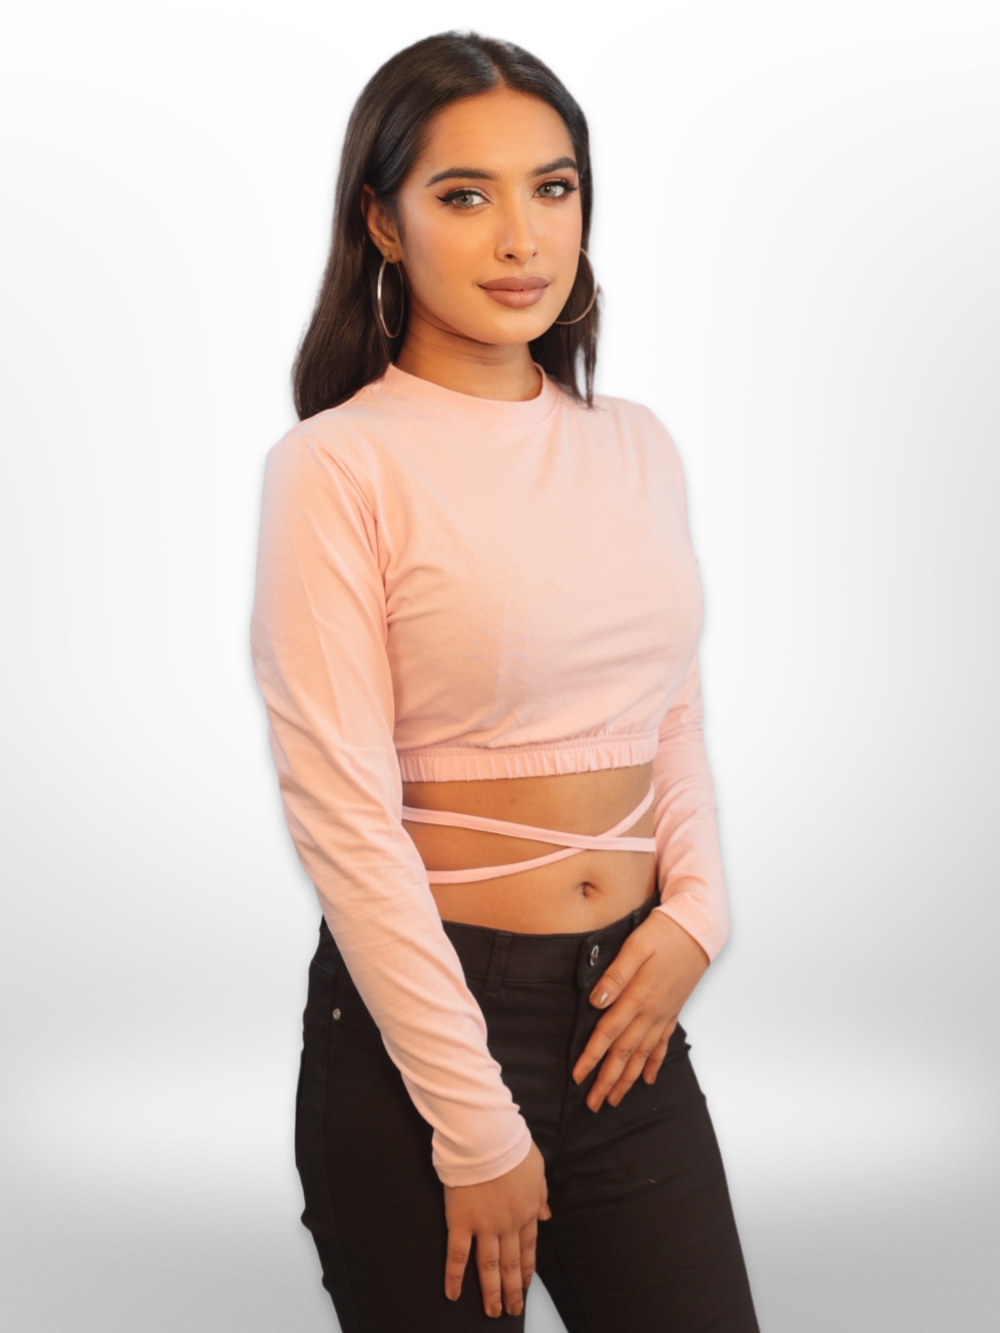 Midriff Flossing Tops Full Sleeve - Legacy Boutiques